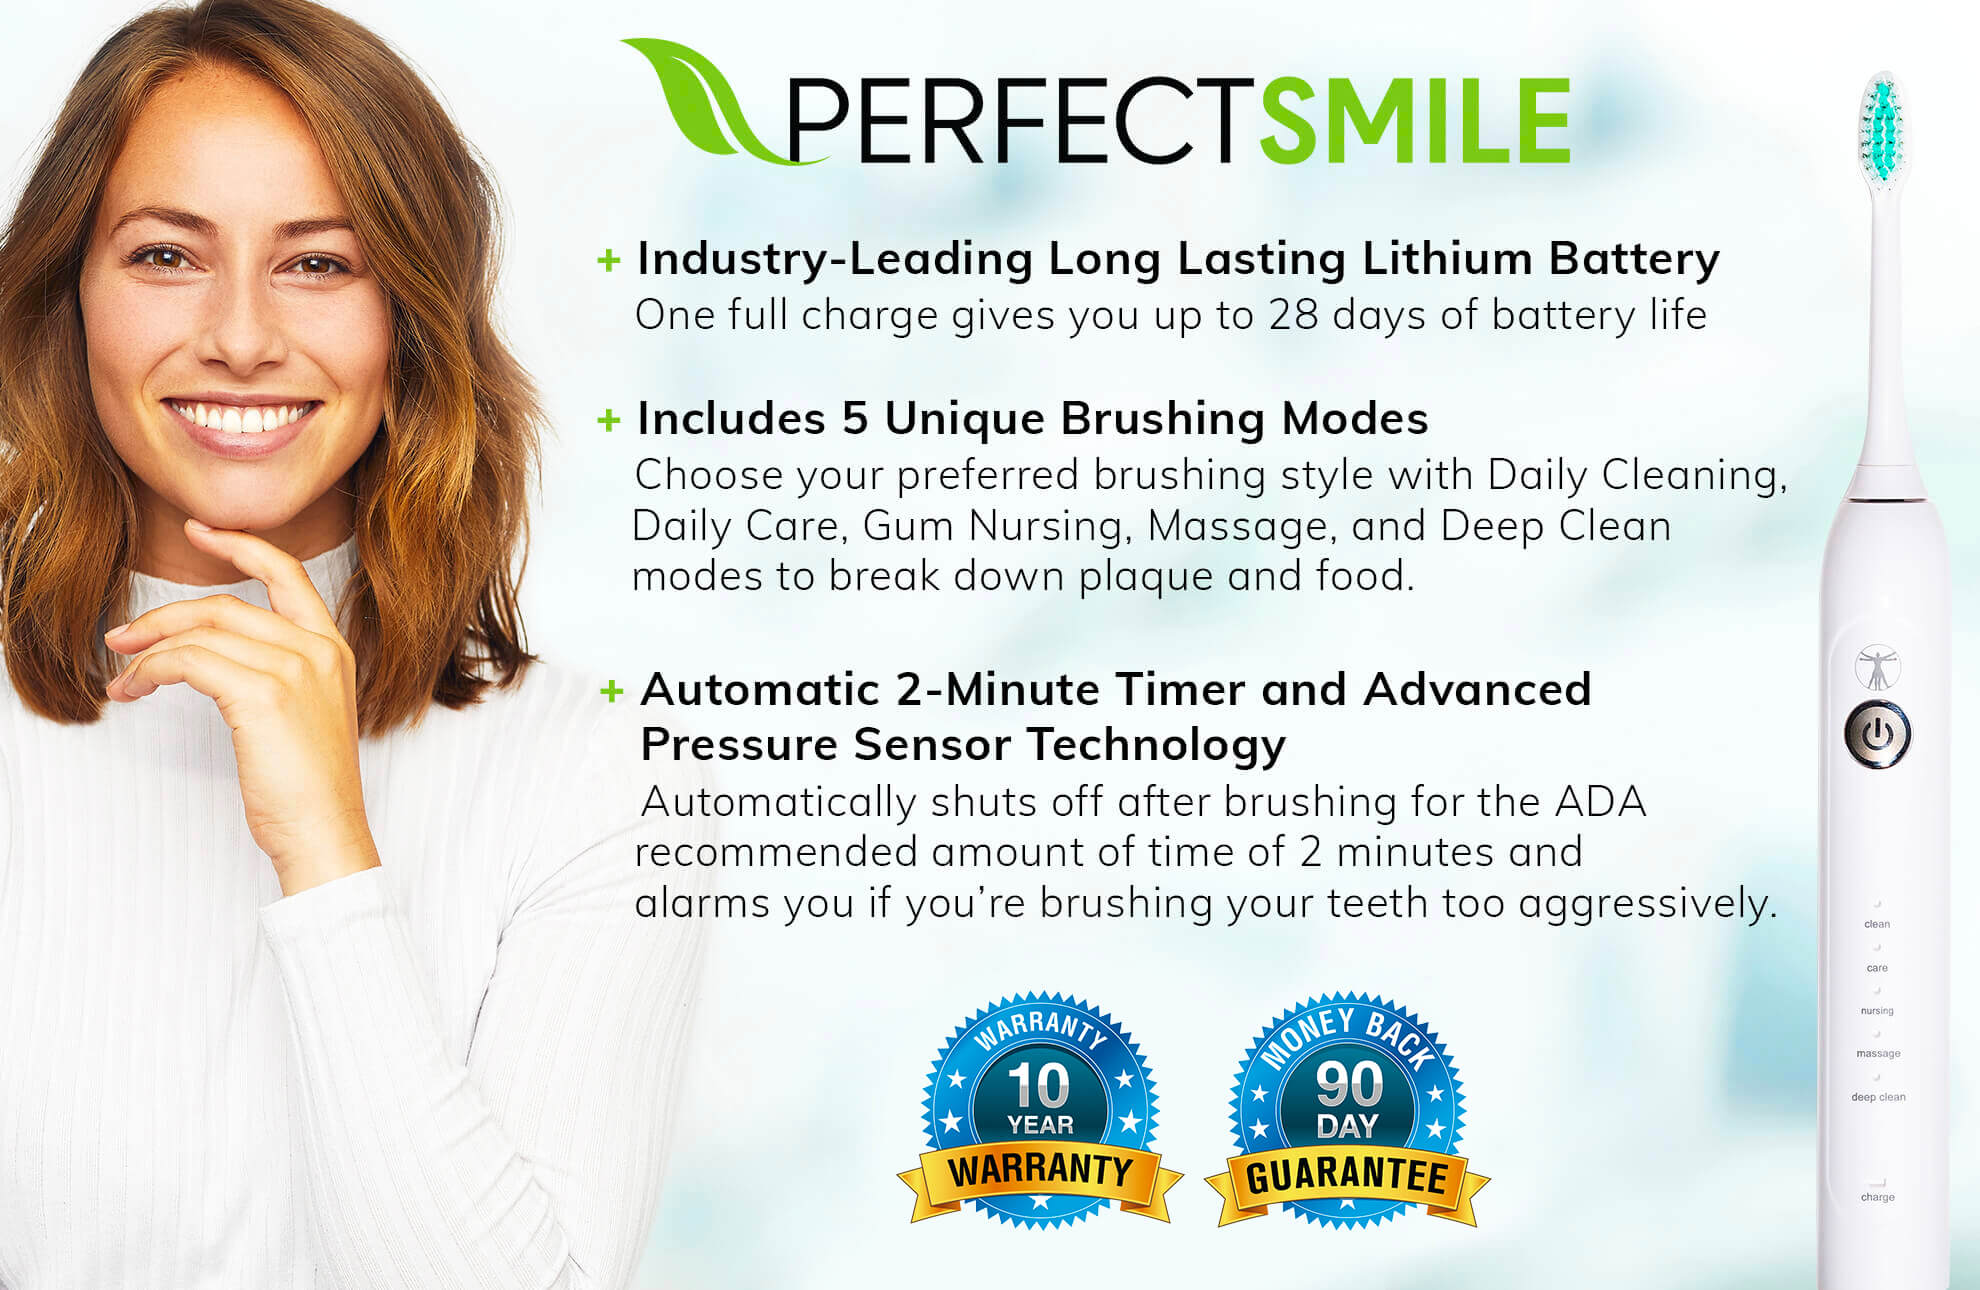 Perfect Smile - Features